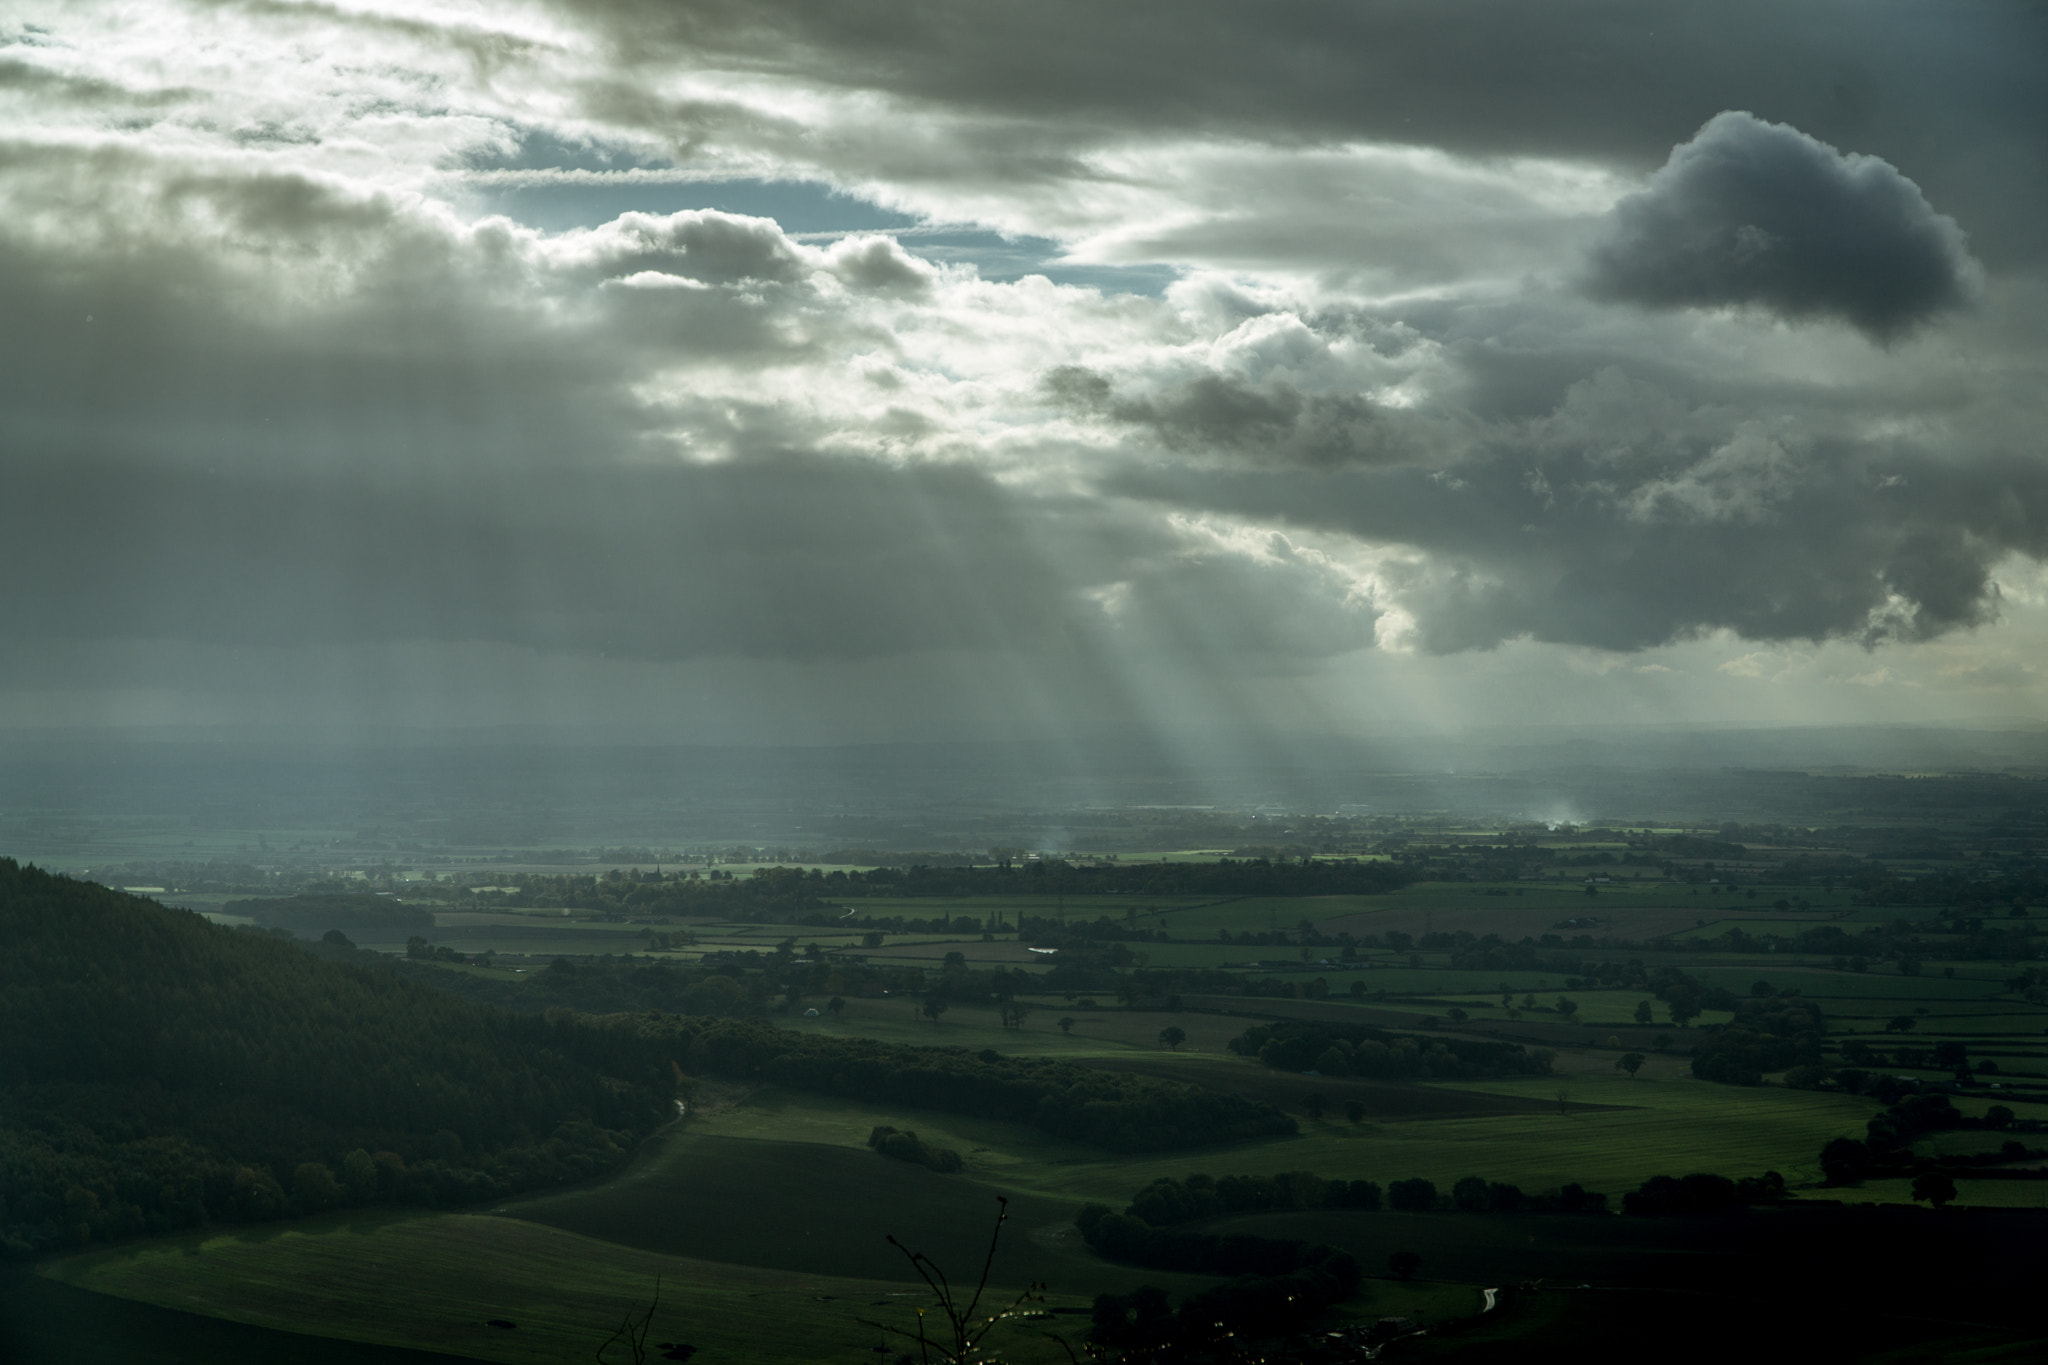 Sony a5100 + Sony E PZ 18-105mm F4 G OSS sample photo. Sutton bank - rains approaching photography